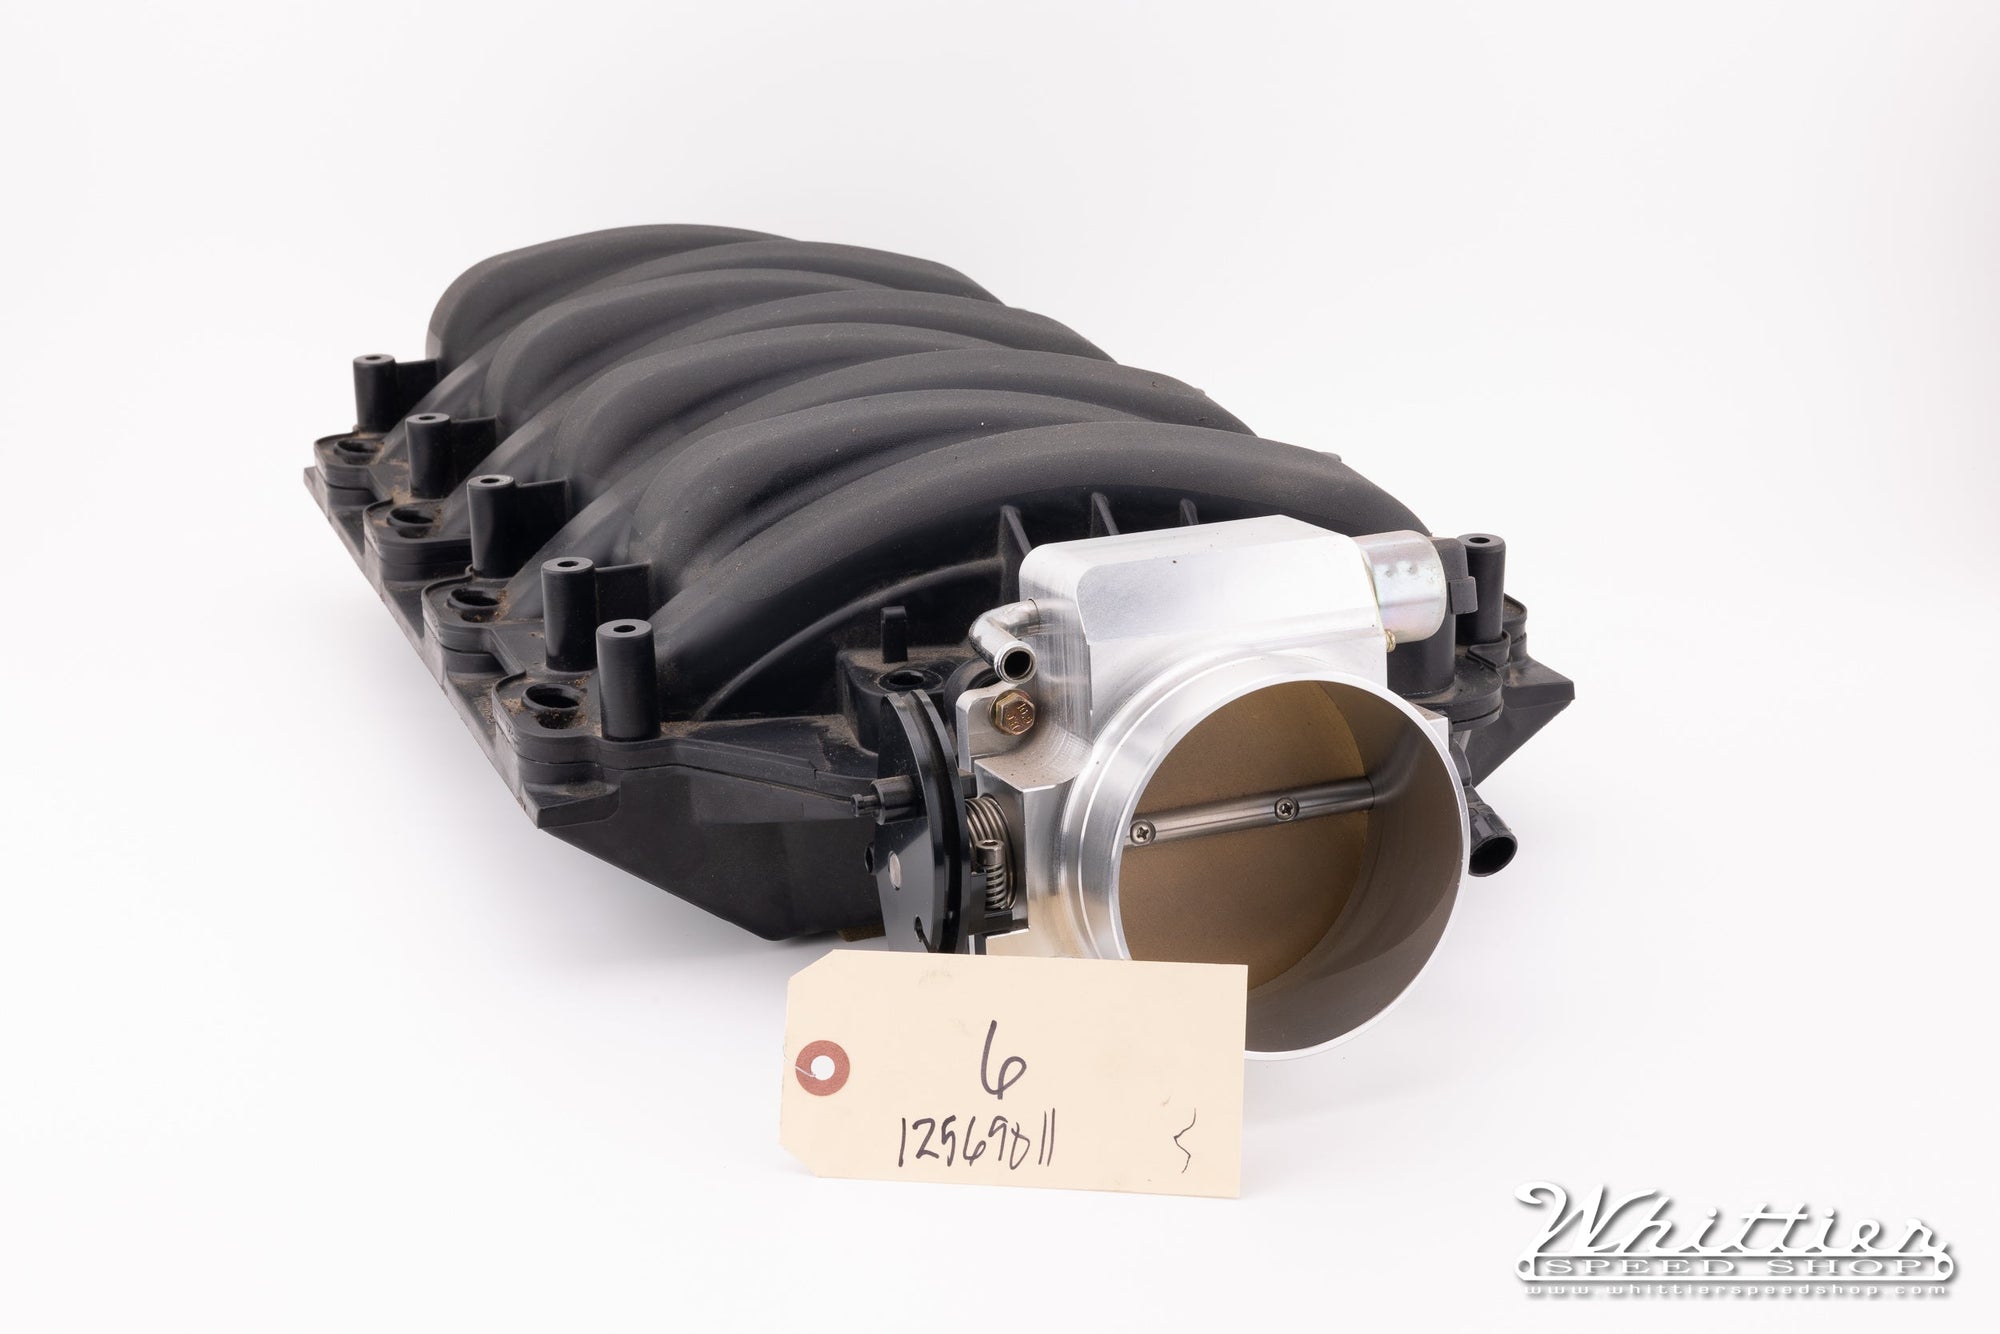 Used OE LS7 Manifold (12569011) with Aftermarket Throttle Body